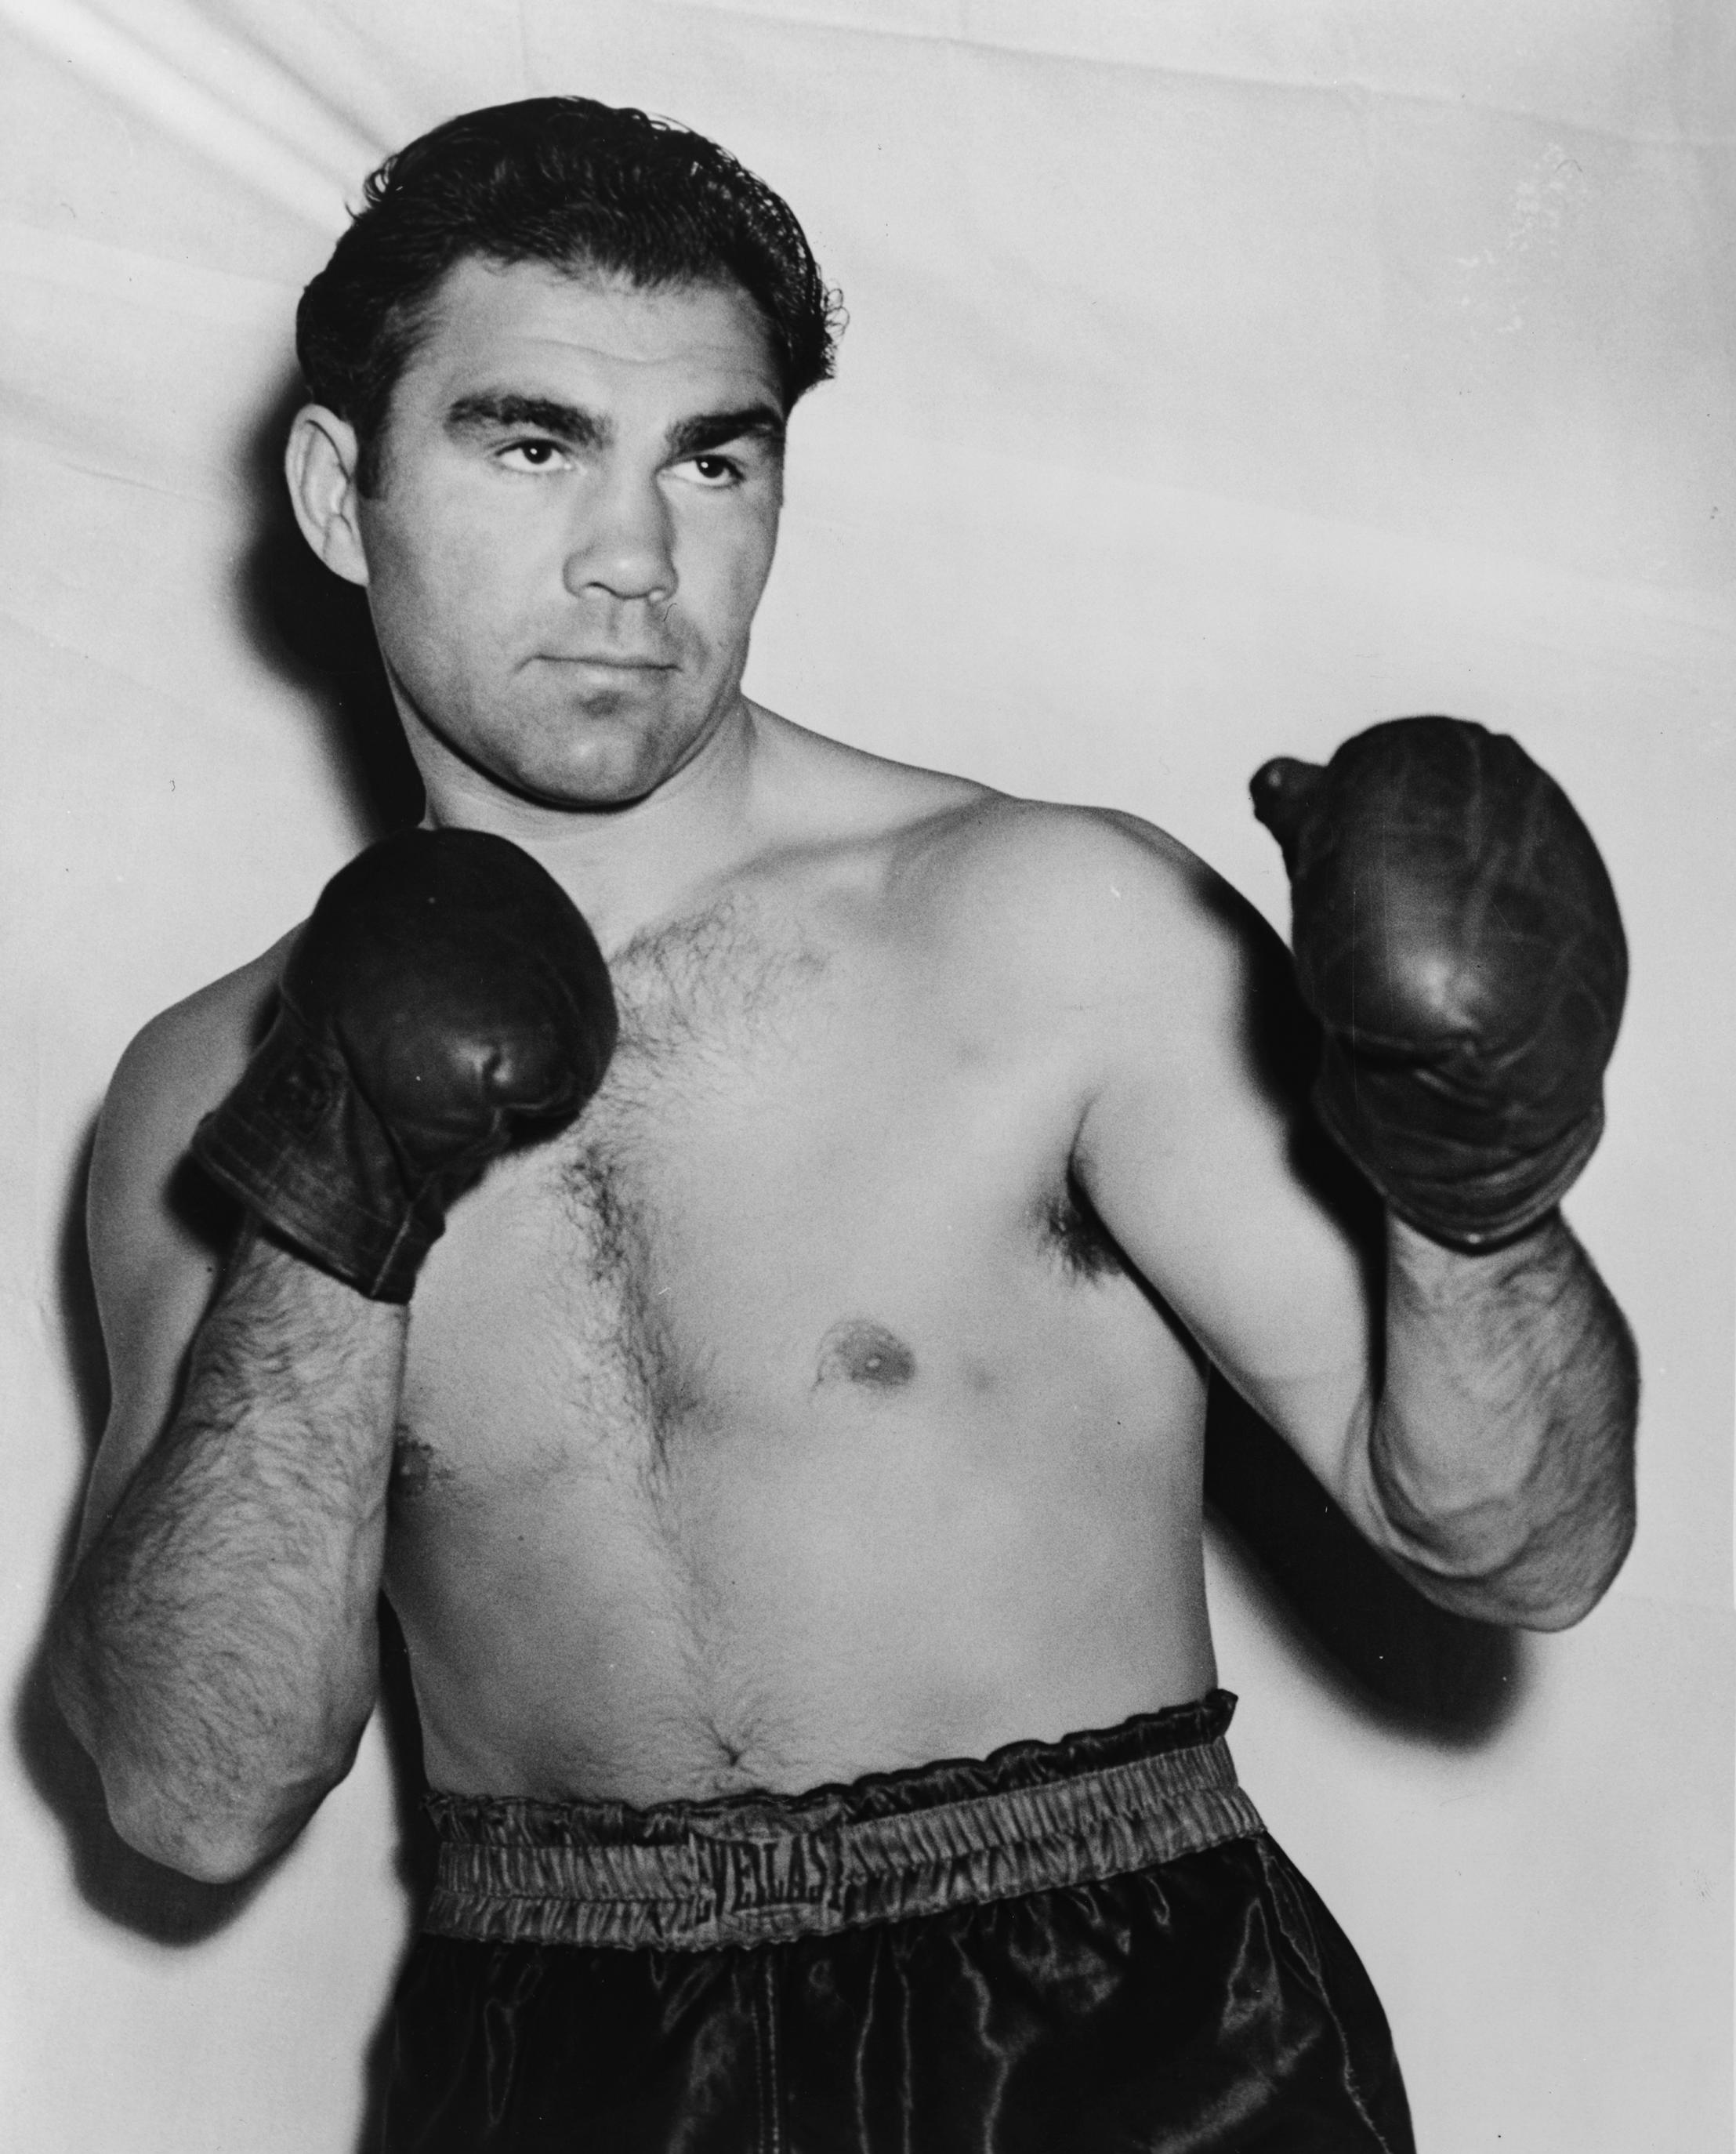 Max schmeling photo